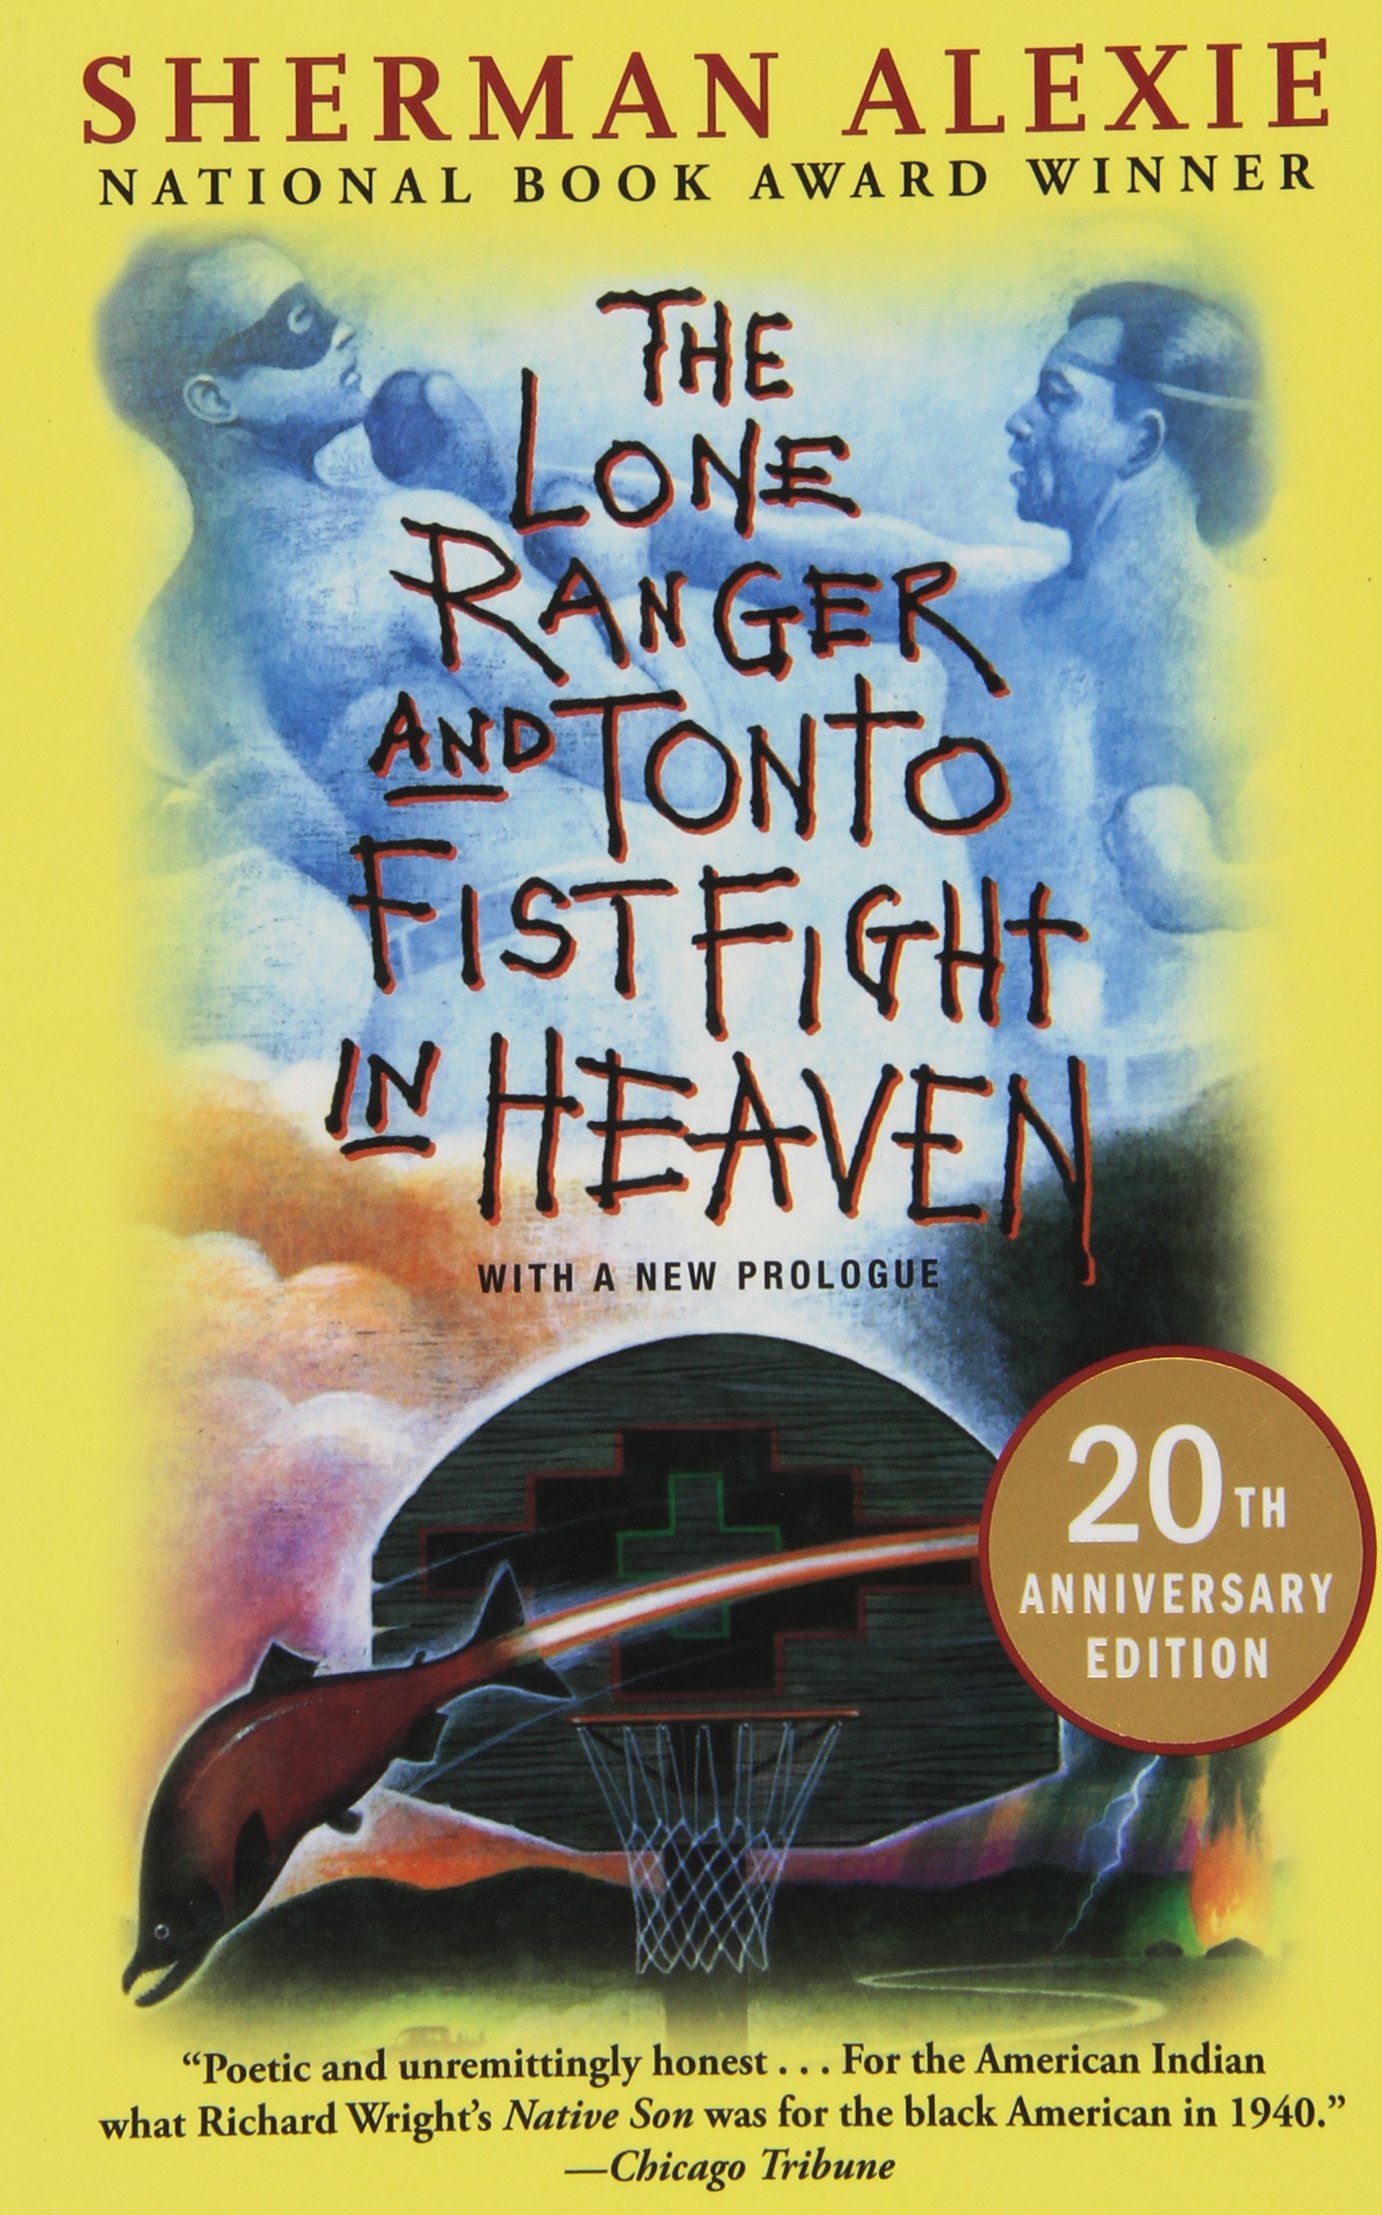 The Lone Ranger and Tonto fistfight in heaven